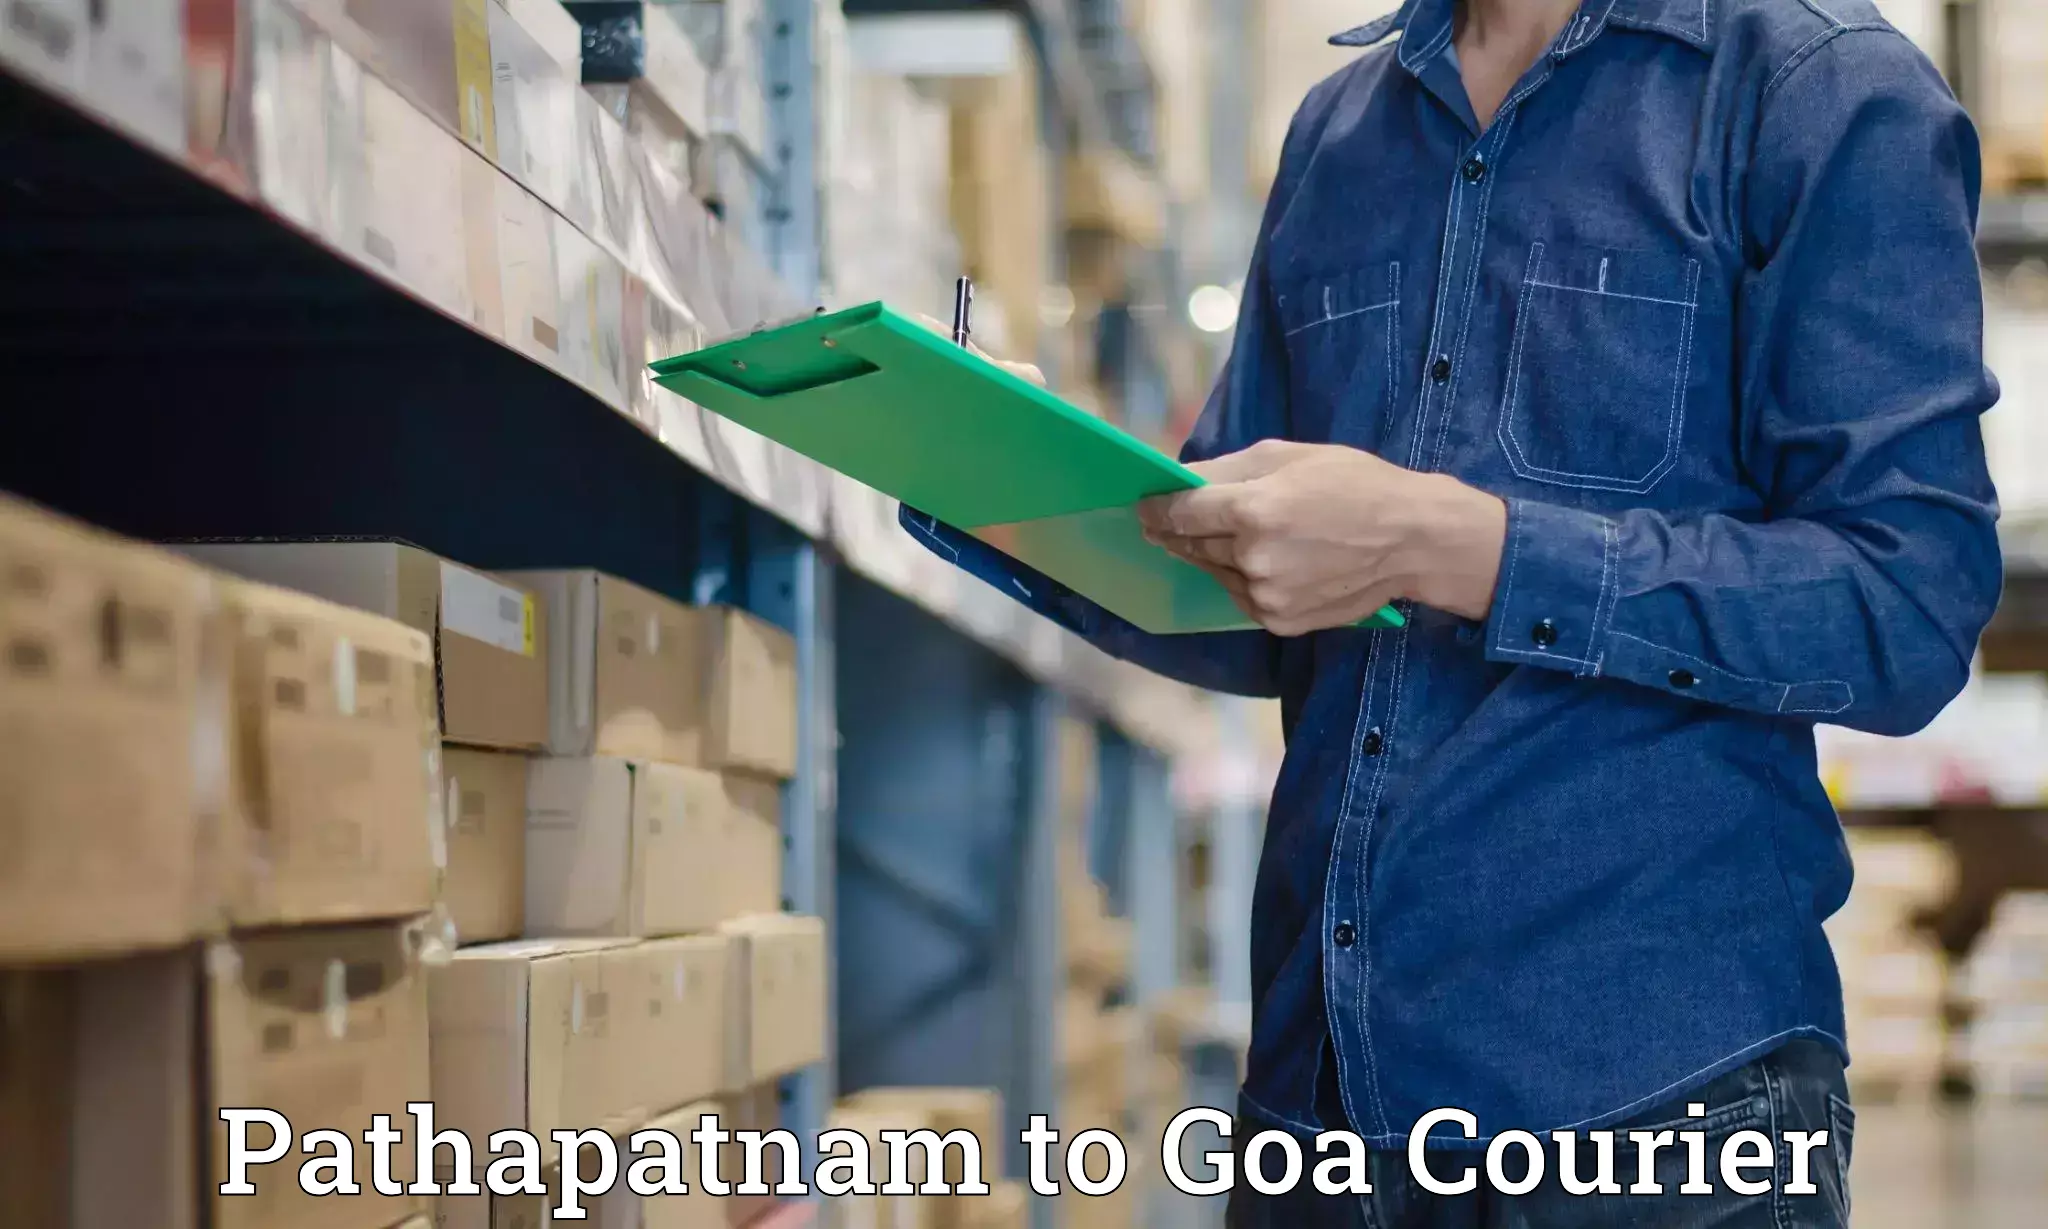 Cash on delivery service Pathapatnam to Goa